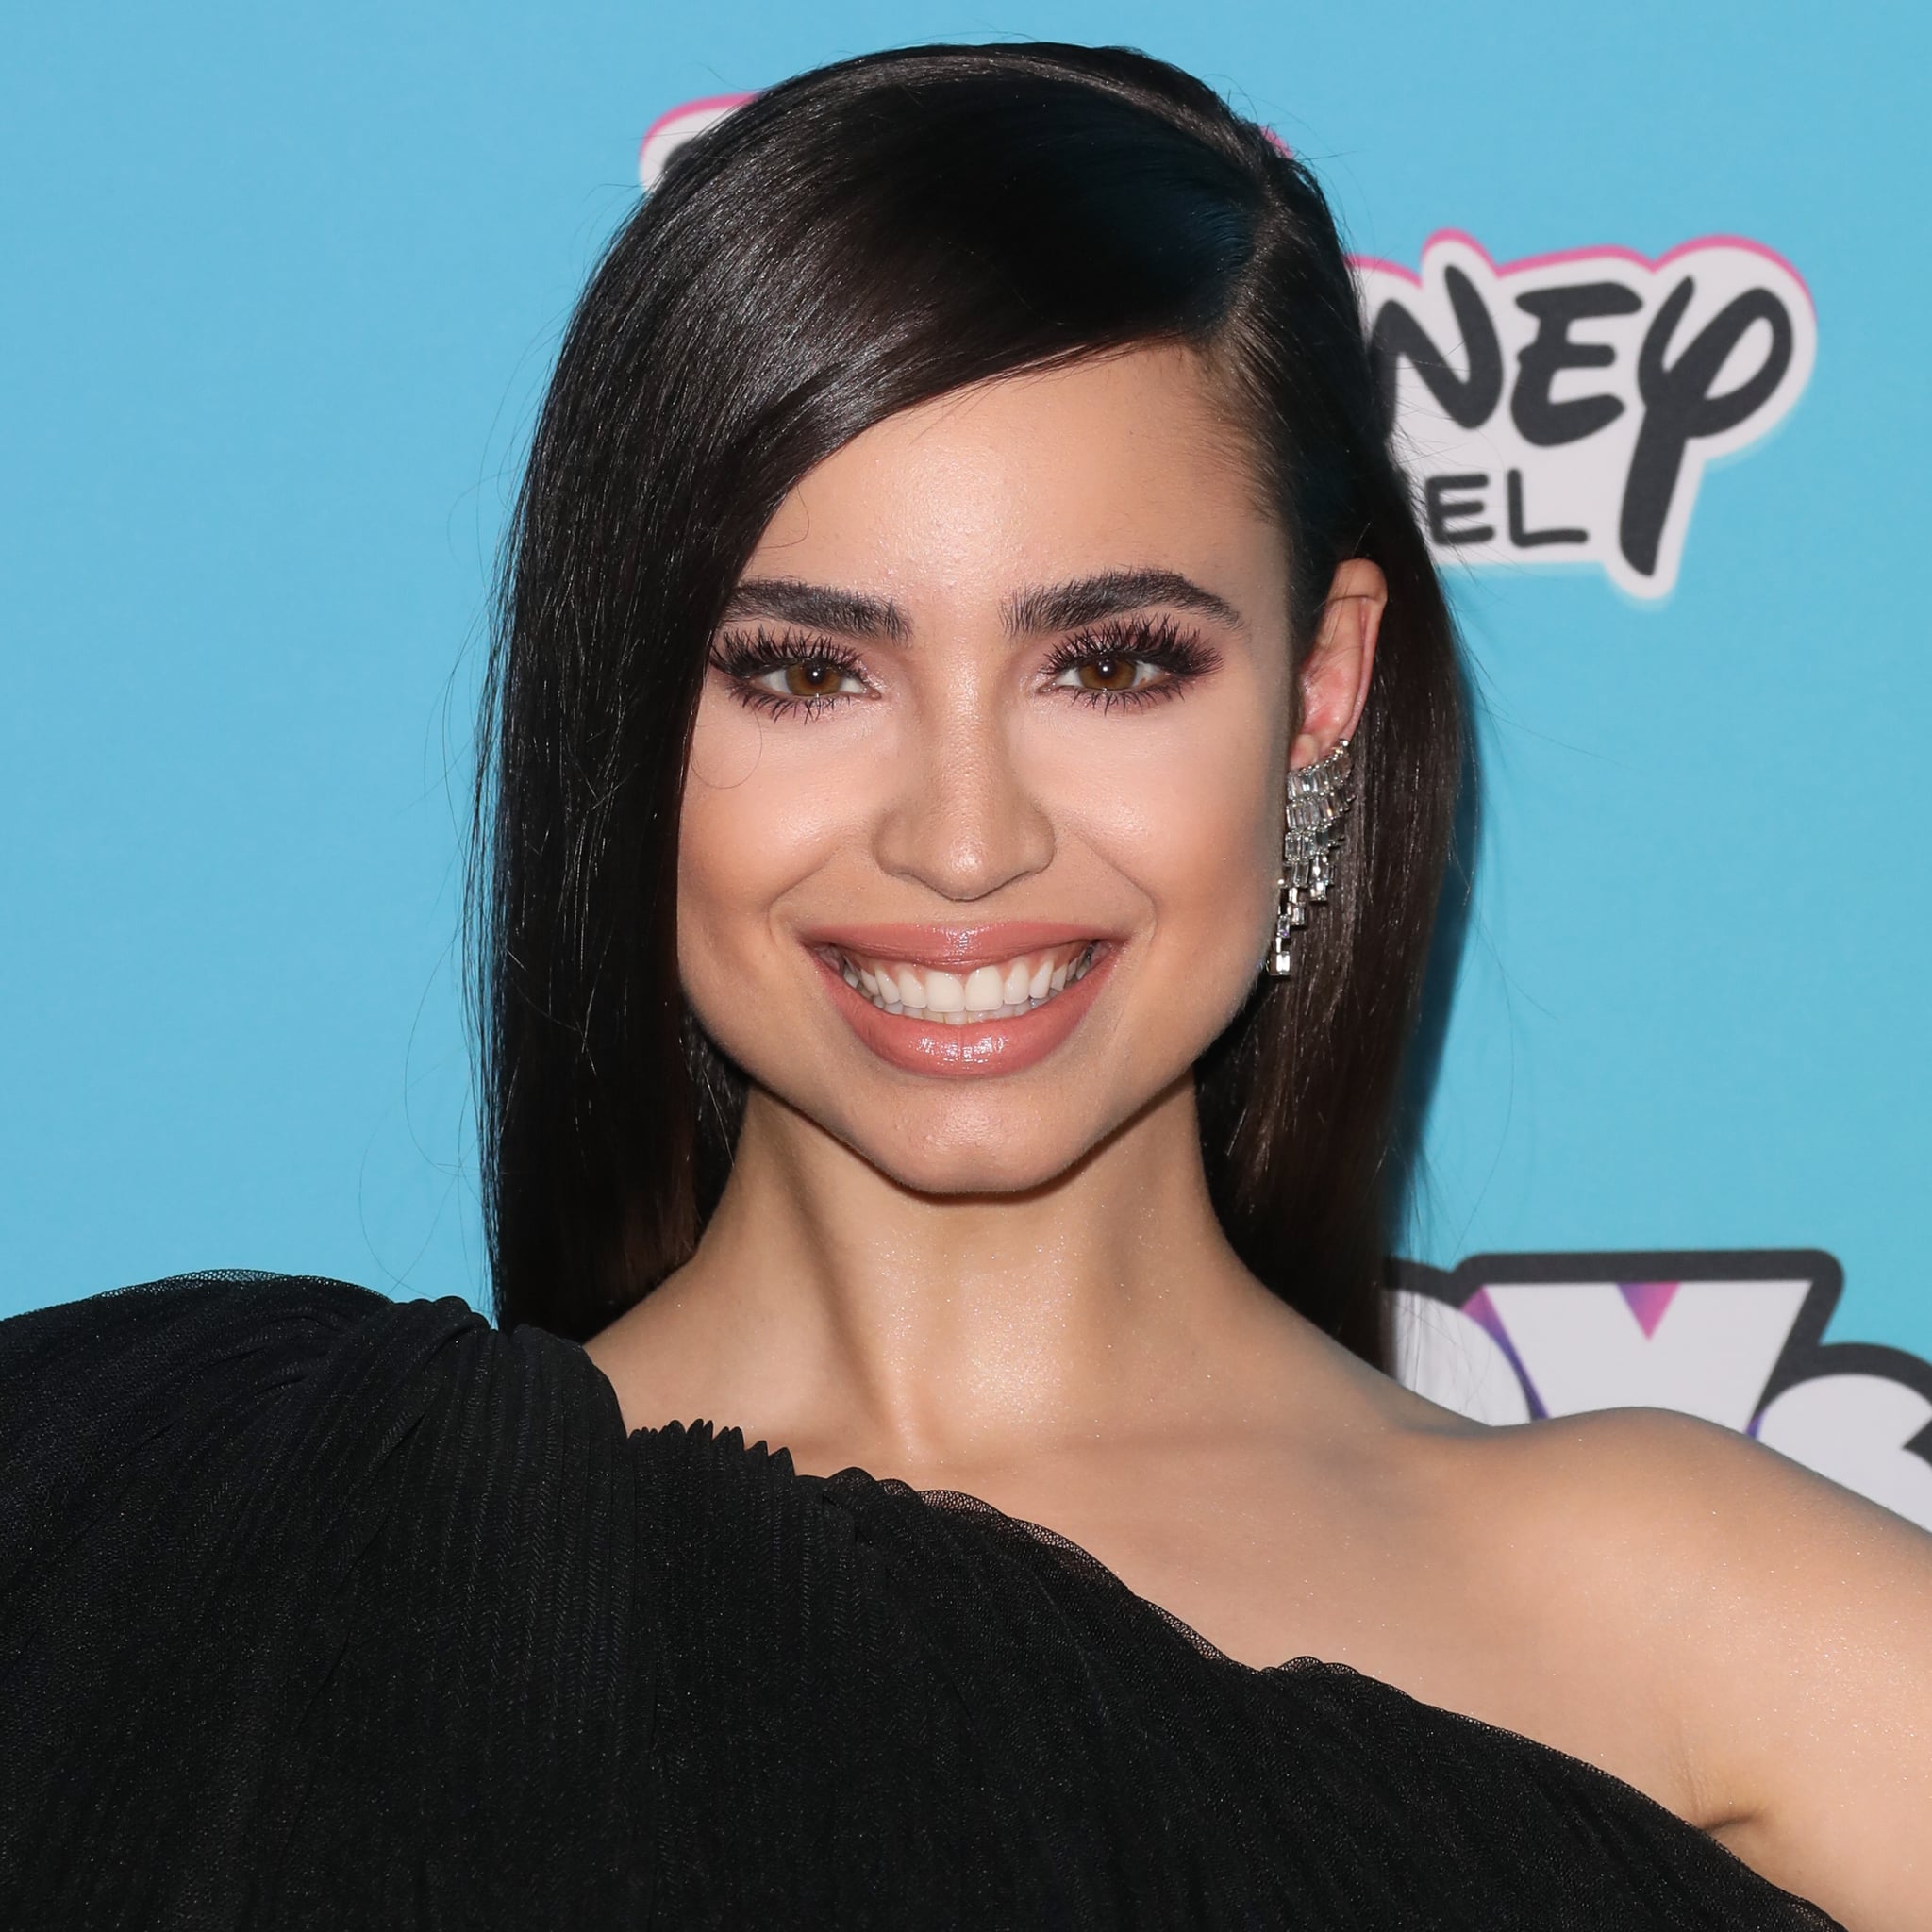 Sofia Carson to star in Netflix's 'Feel the Beat' - DKODING